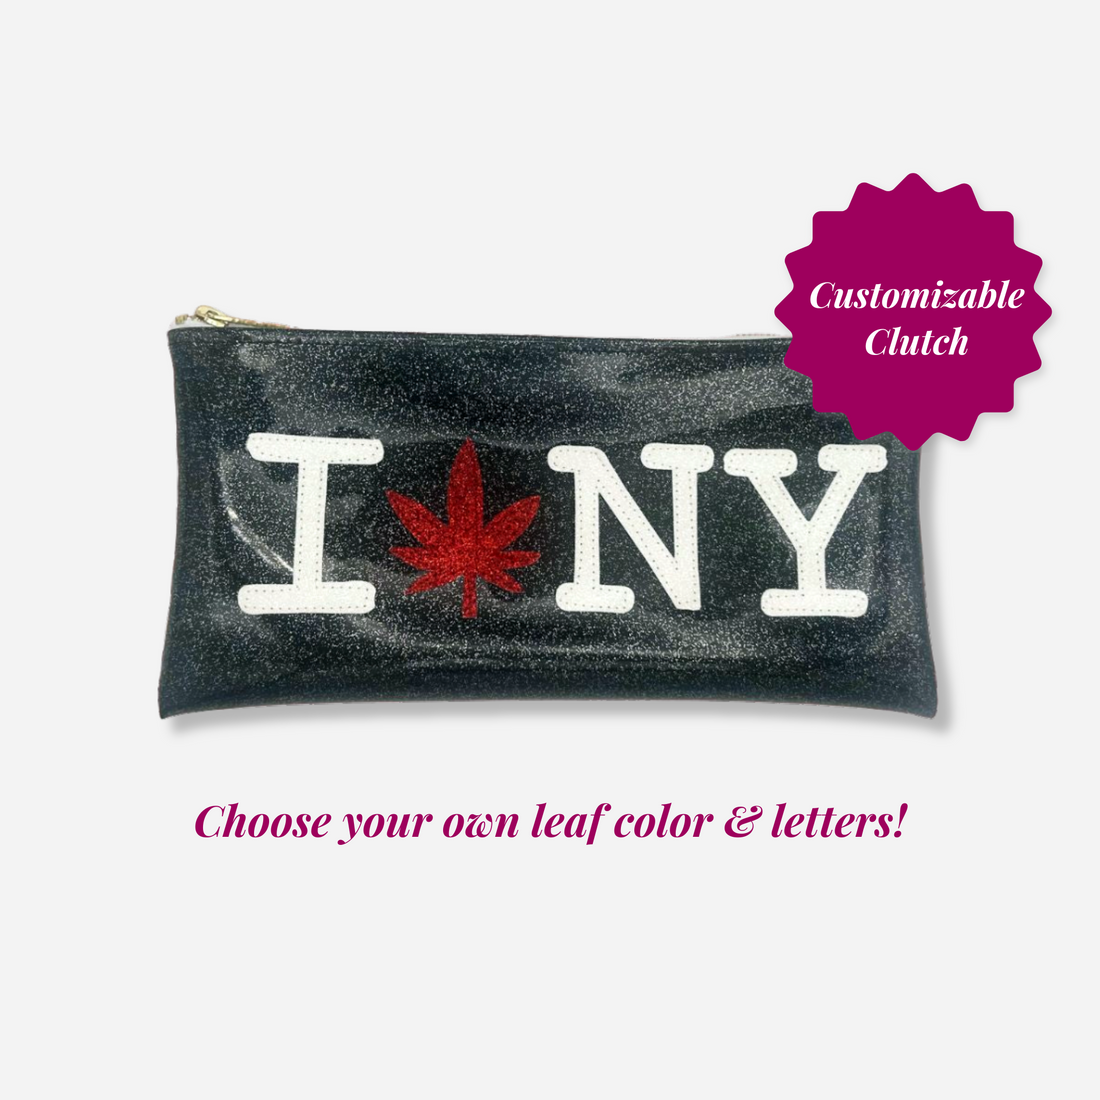 Design your own cannabis-themed clutch with choice of leaf color and letters.